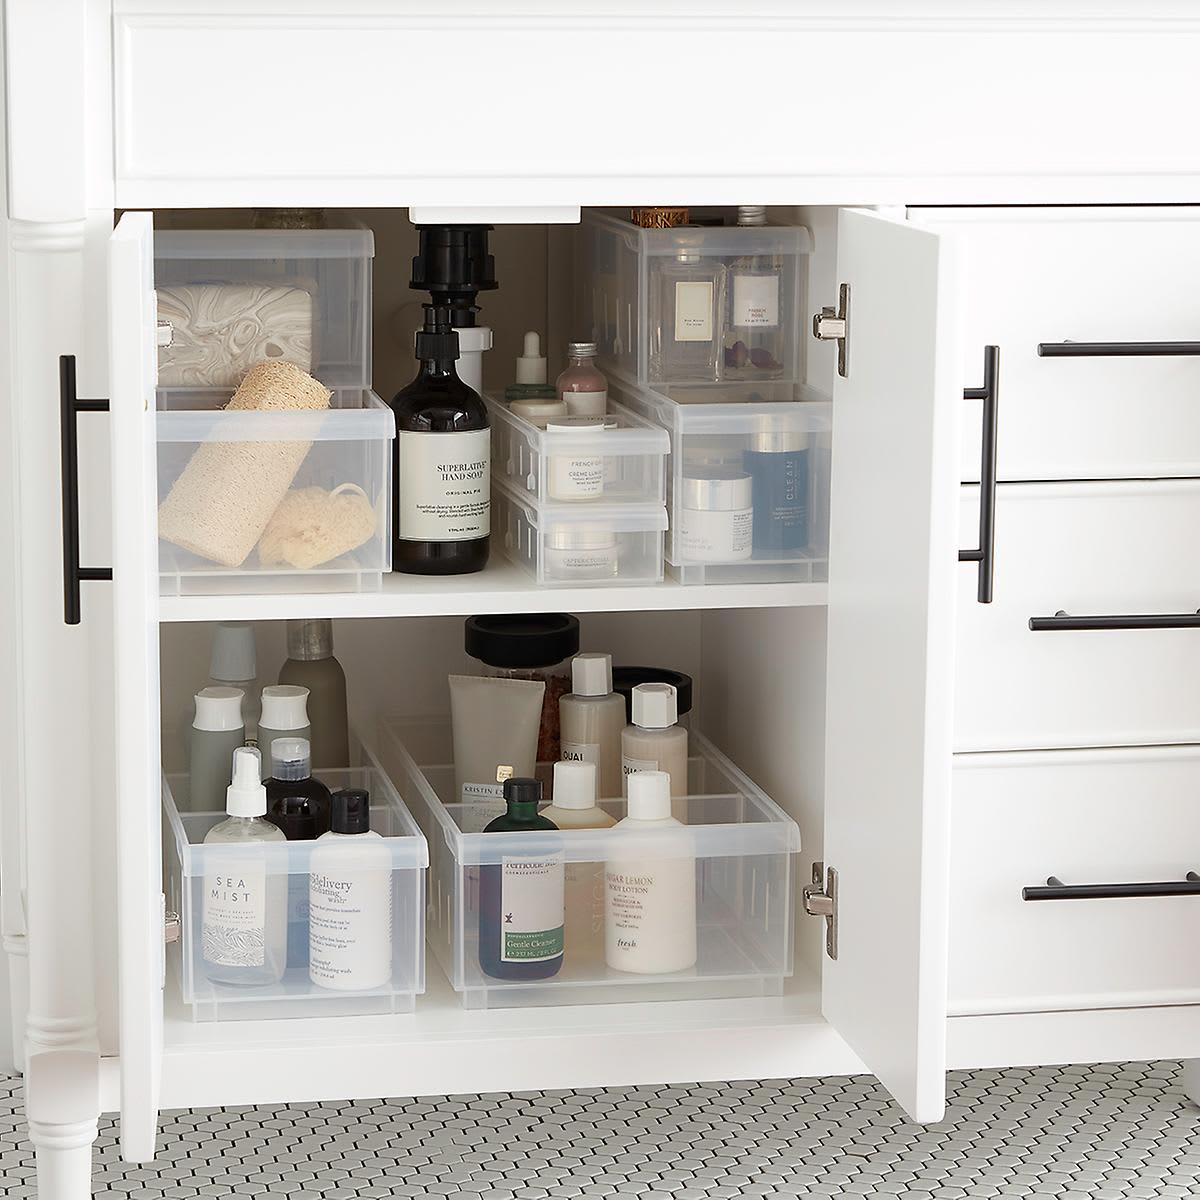 https://cdn.apartmenttherapy.info/image/upload/v1561744641/at/product%20listing/clear-stackable-storage-containers.jpg